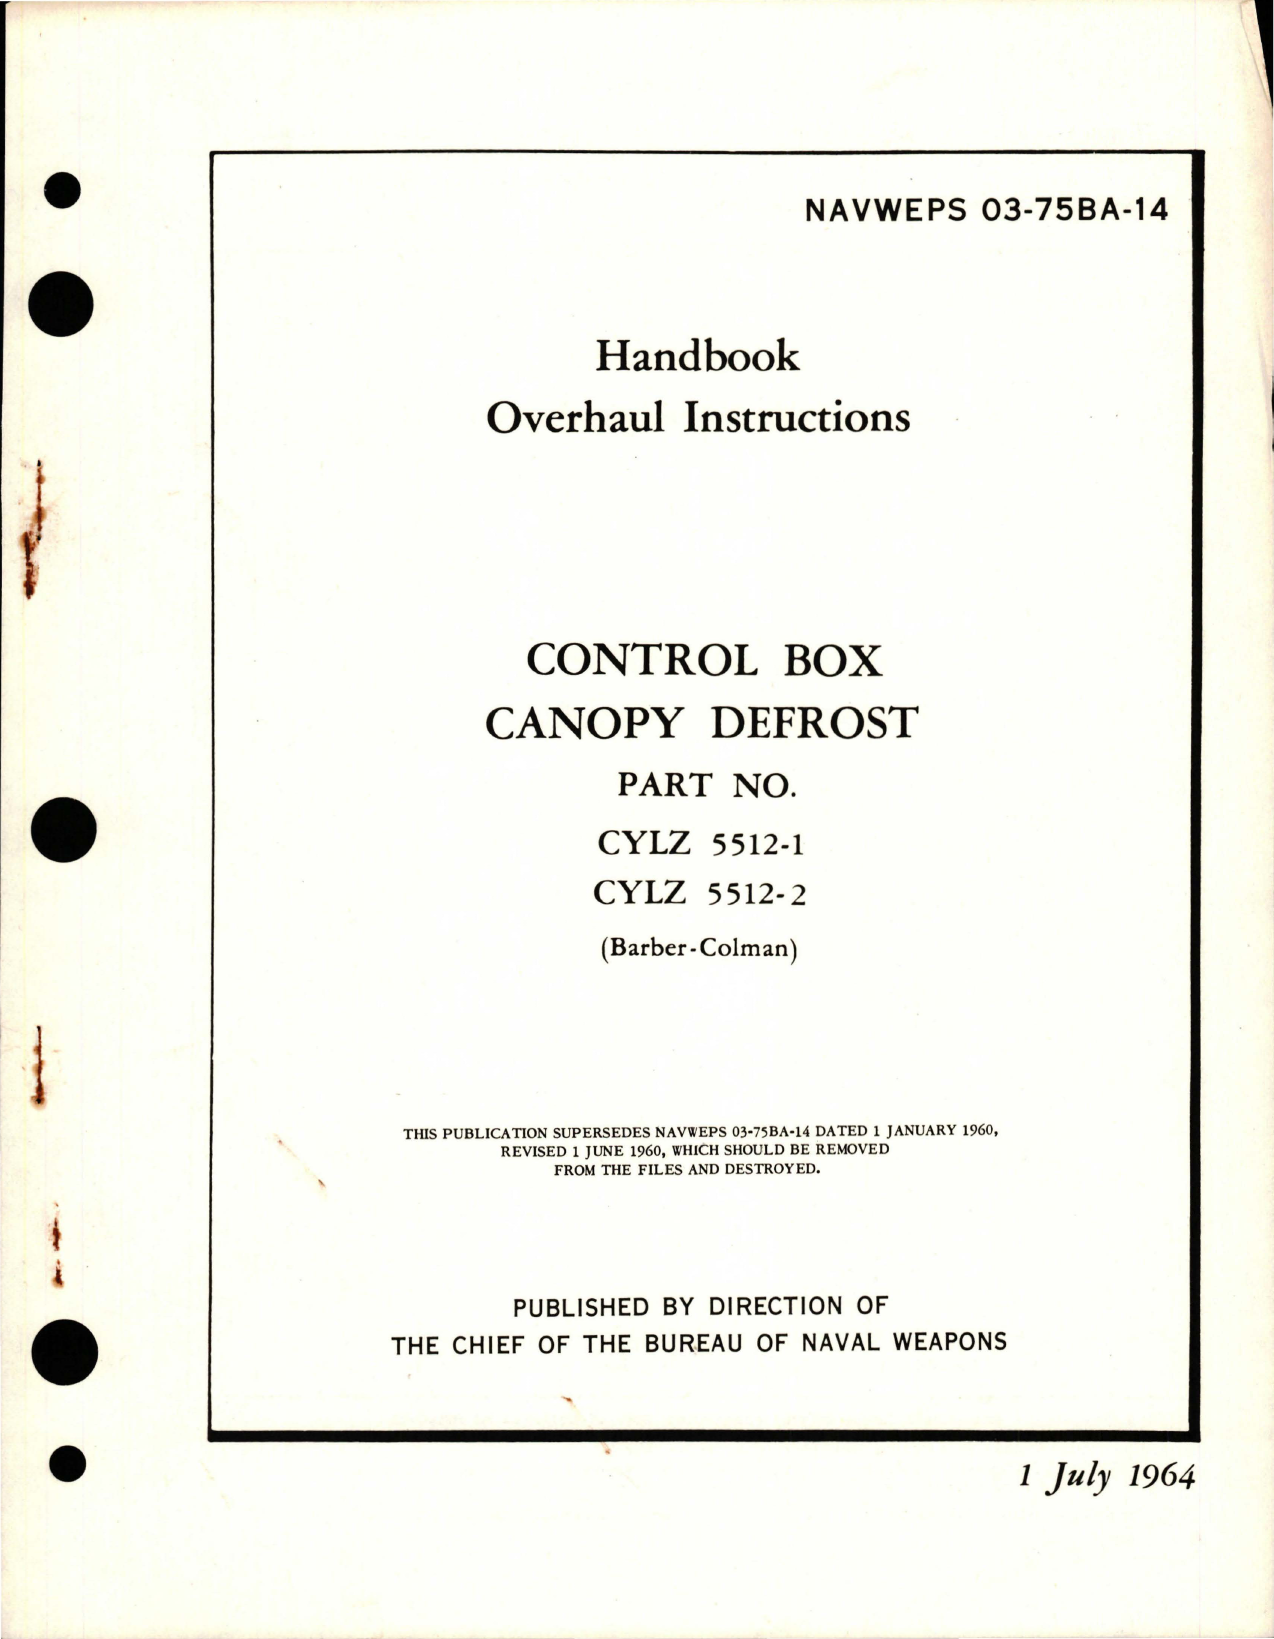 Sample page 1 from AirCorps Library document: Overhaul Instructions for Control Box Canopy Defrost - Parts CYLZ 5512-1 and CYLZ 5512-2